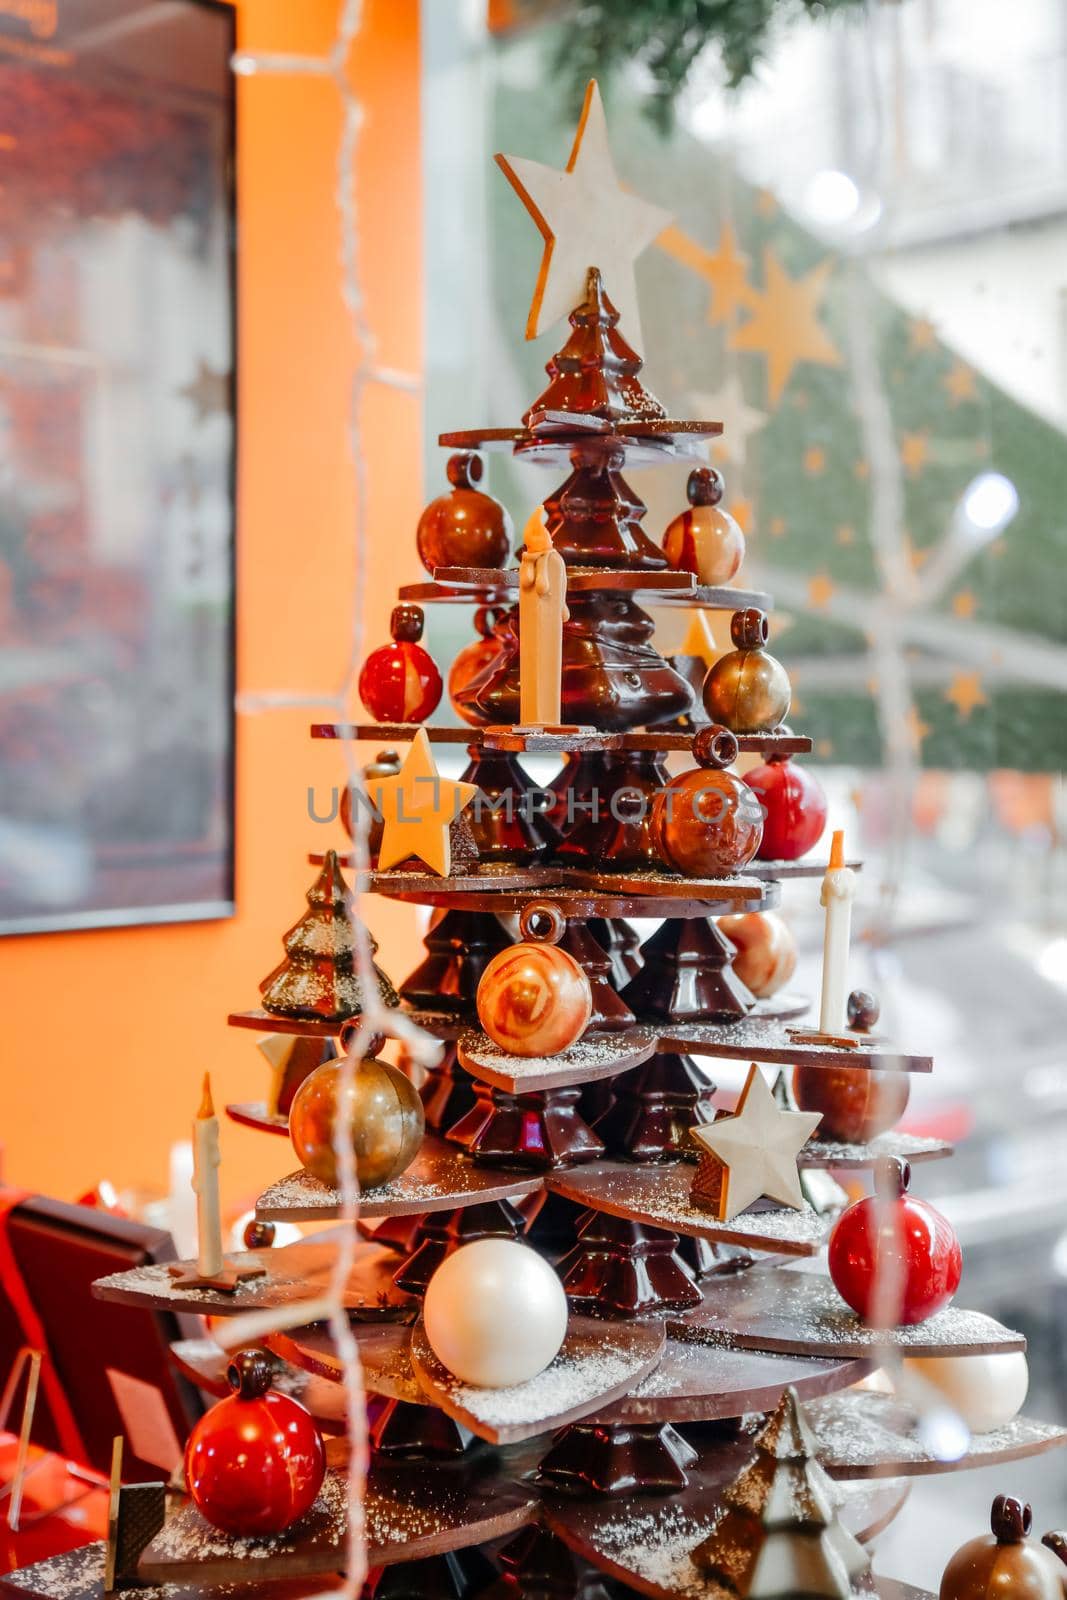 Chocolate tree in a pastry shop window by Godi